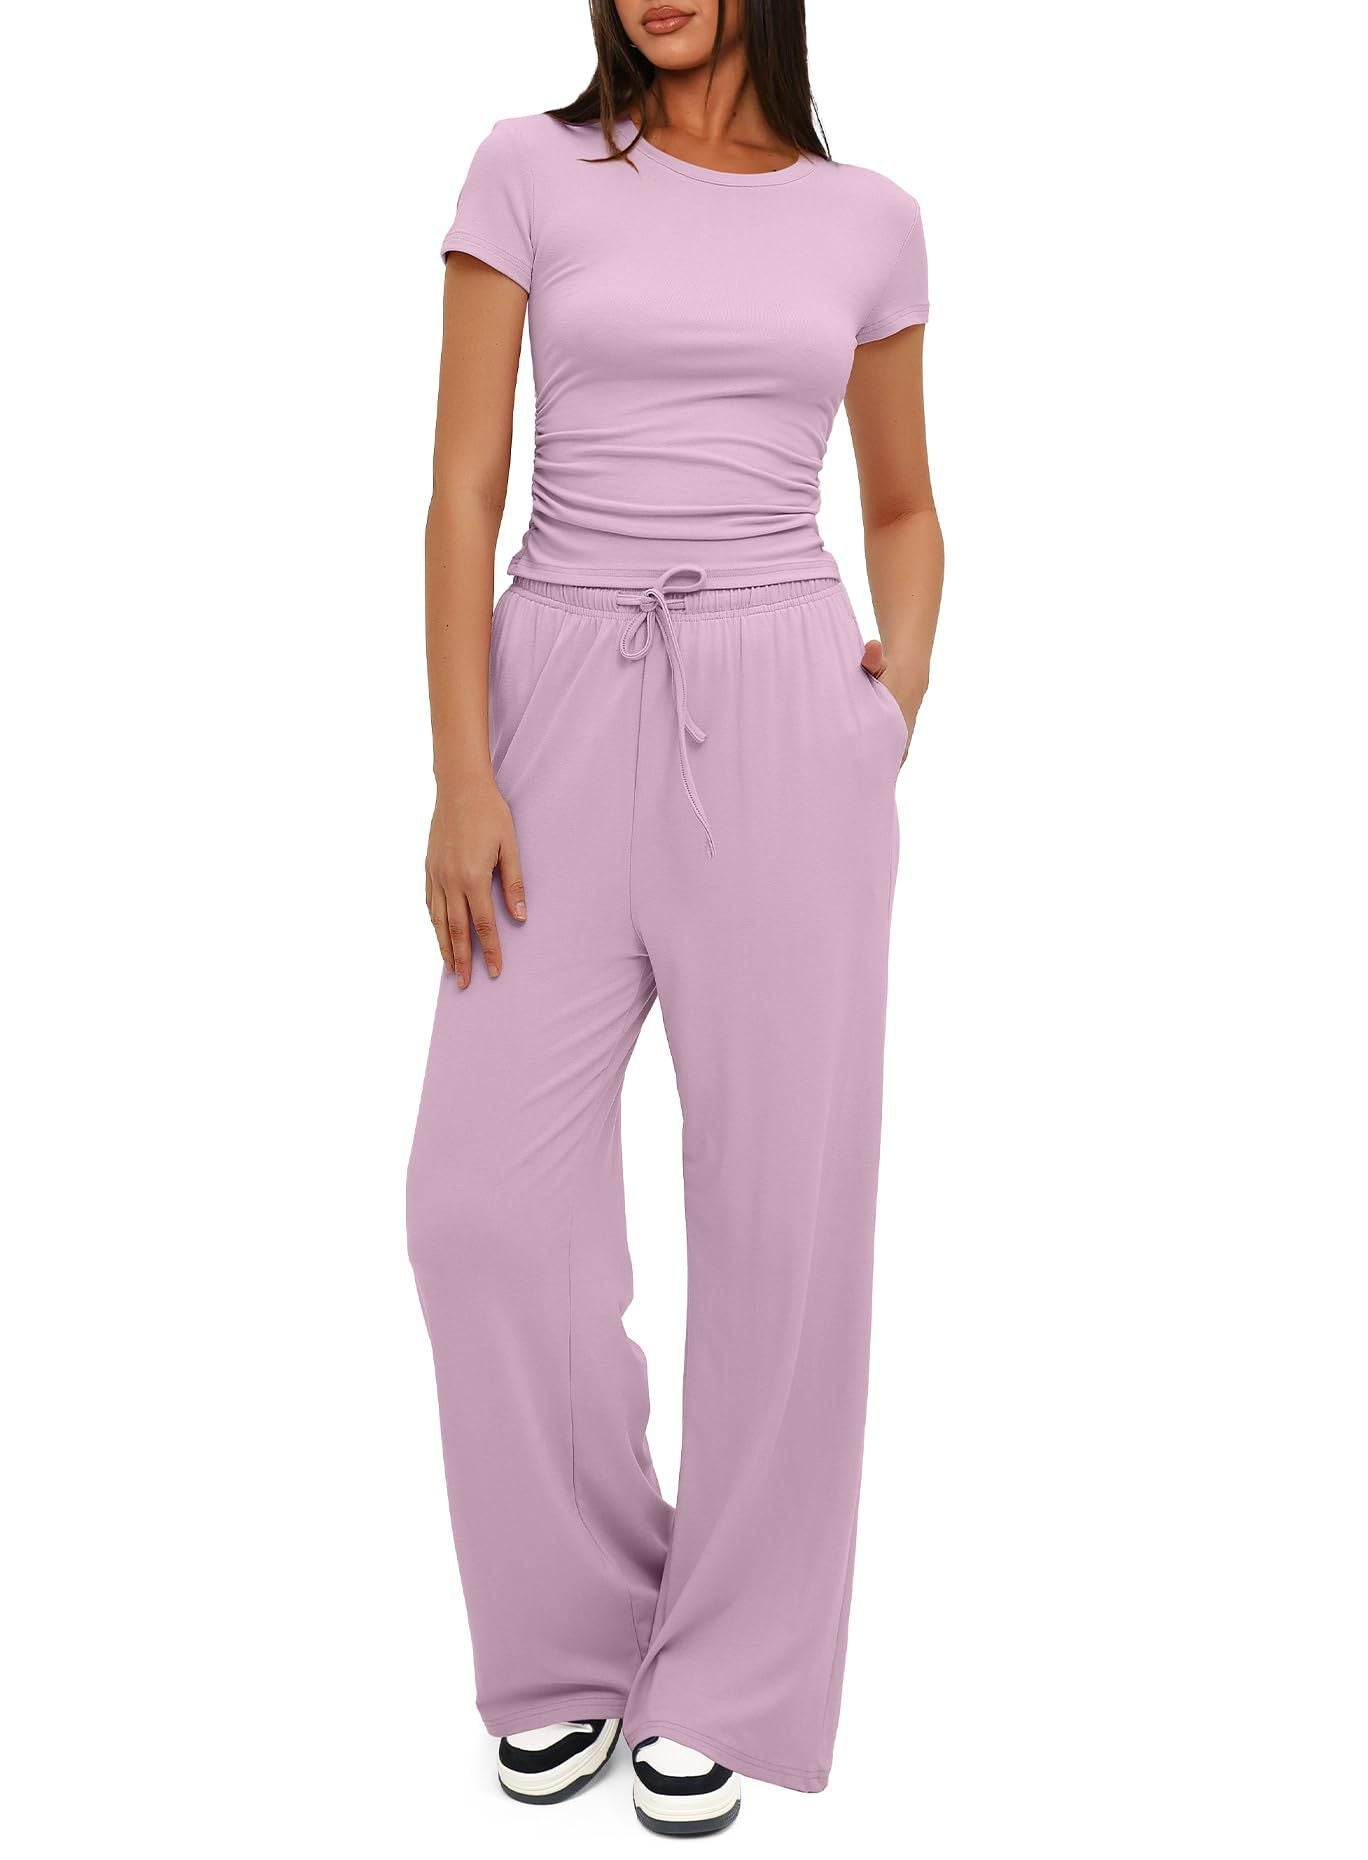 Pink - 2pcs Solid Color Casual Sport Short-sleeved Women'sTop And High-waisted Drawstring Wide-leg Pants - womens pants set at TFC&H Co.